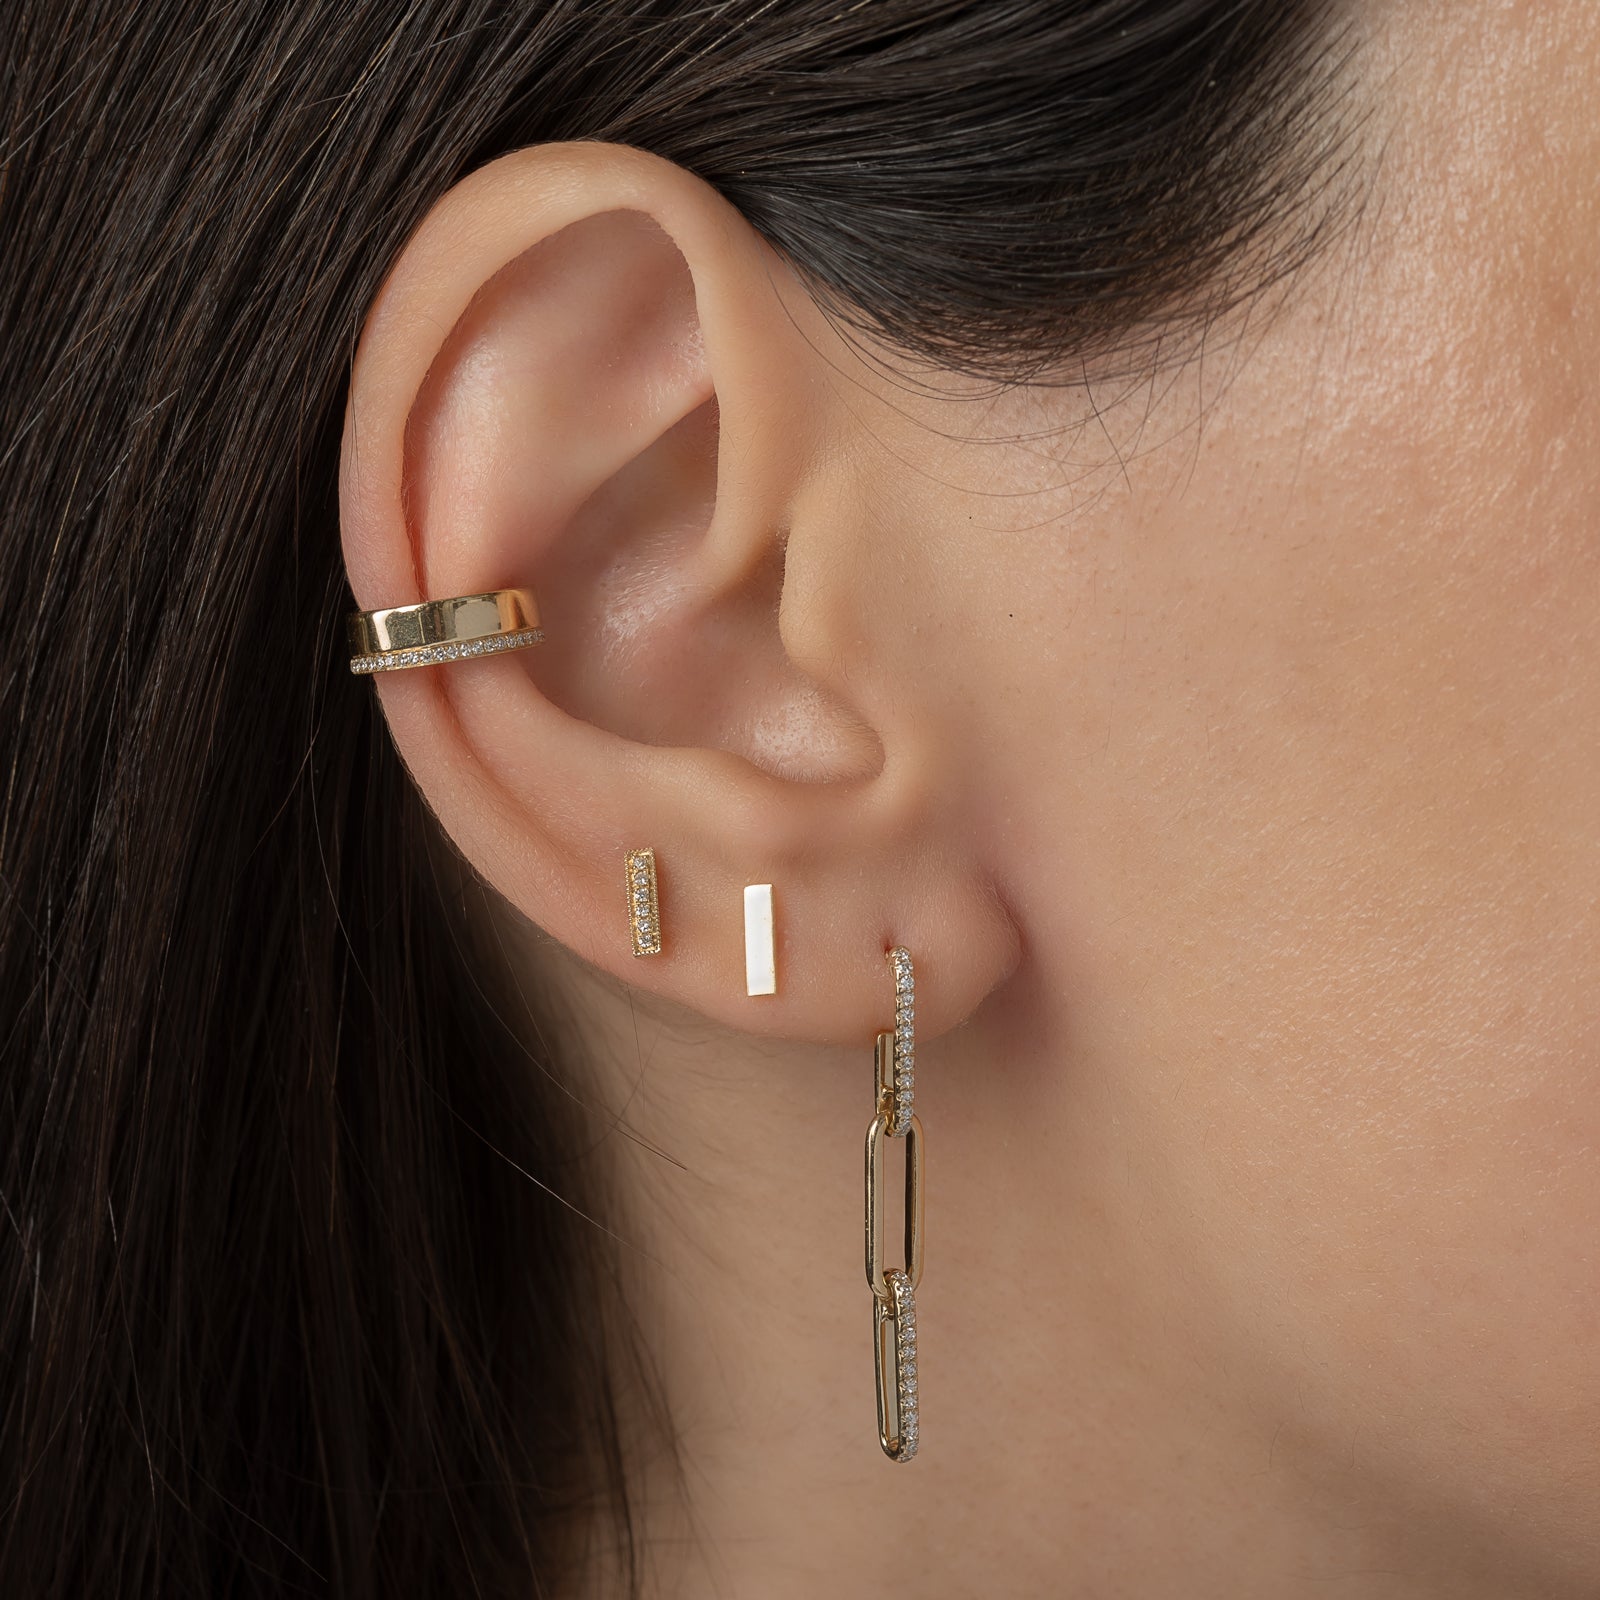 Ear Cuff - The Chic and Edgy Earring Style